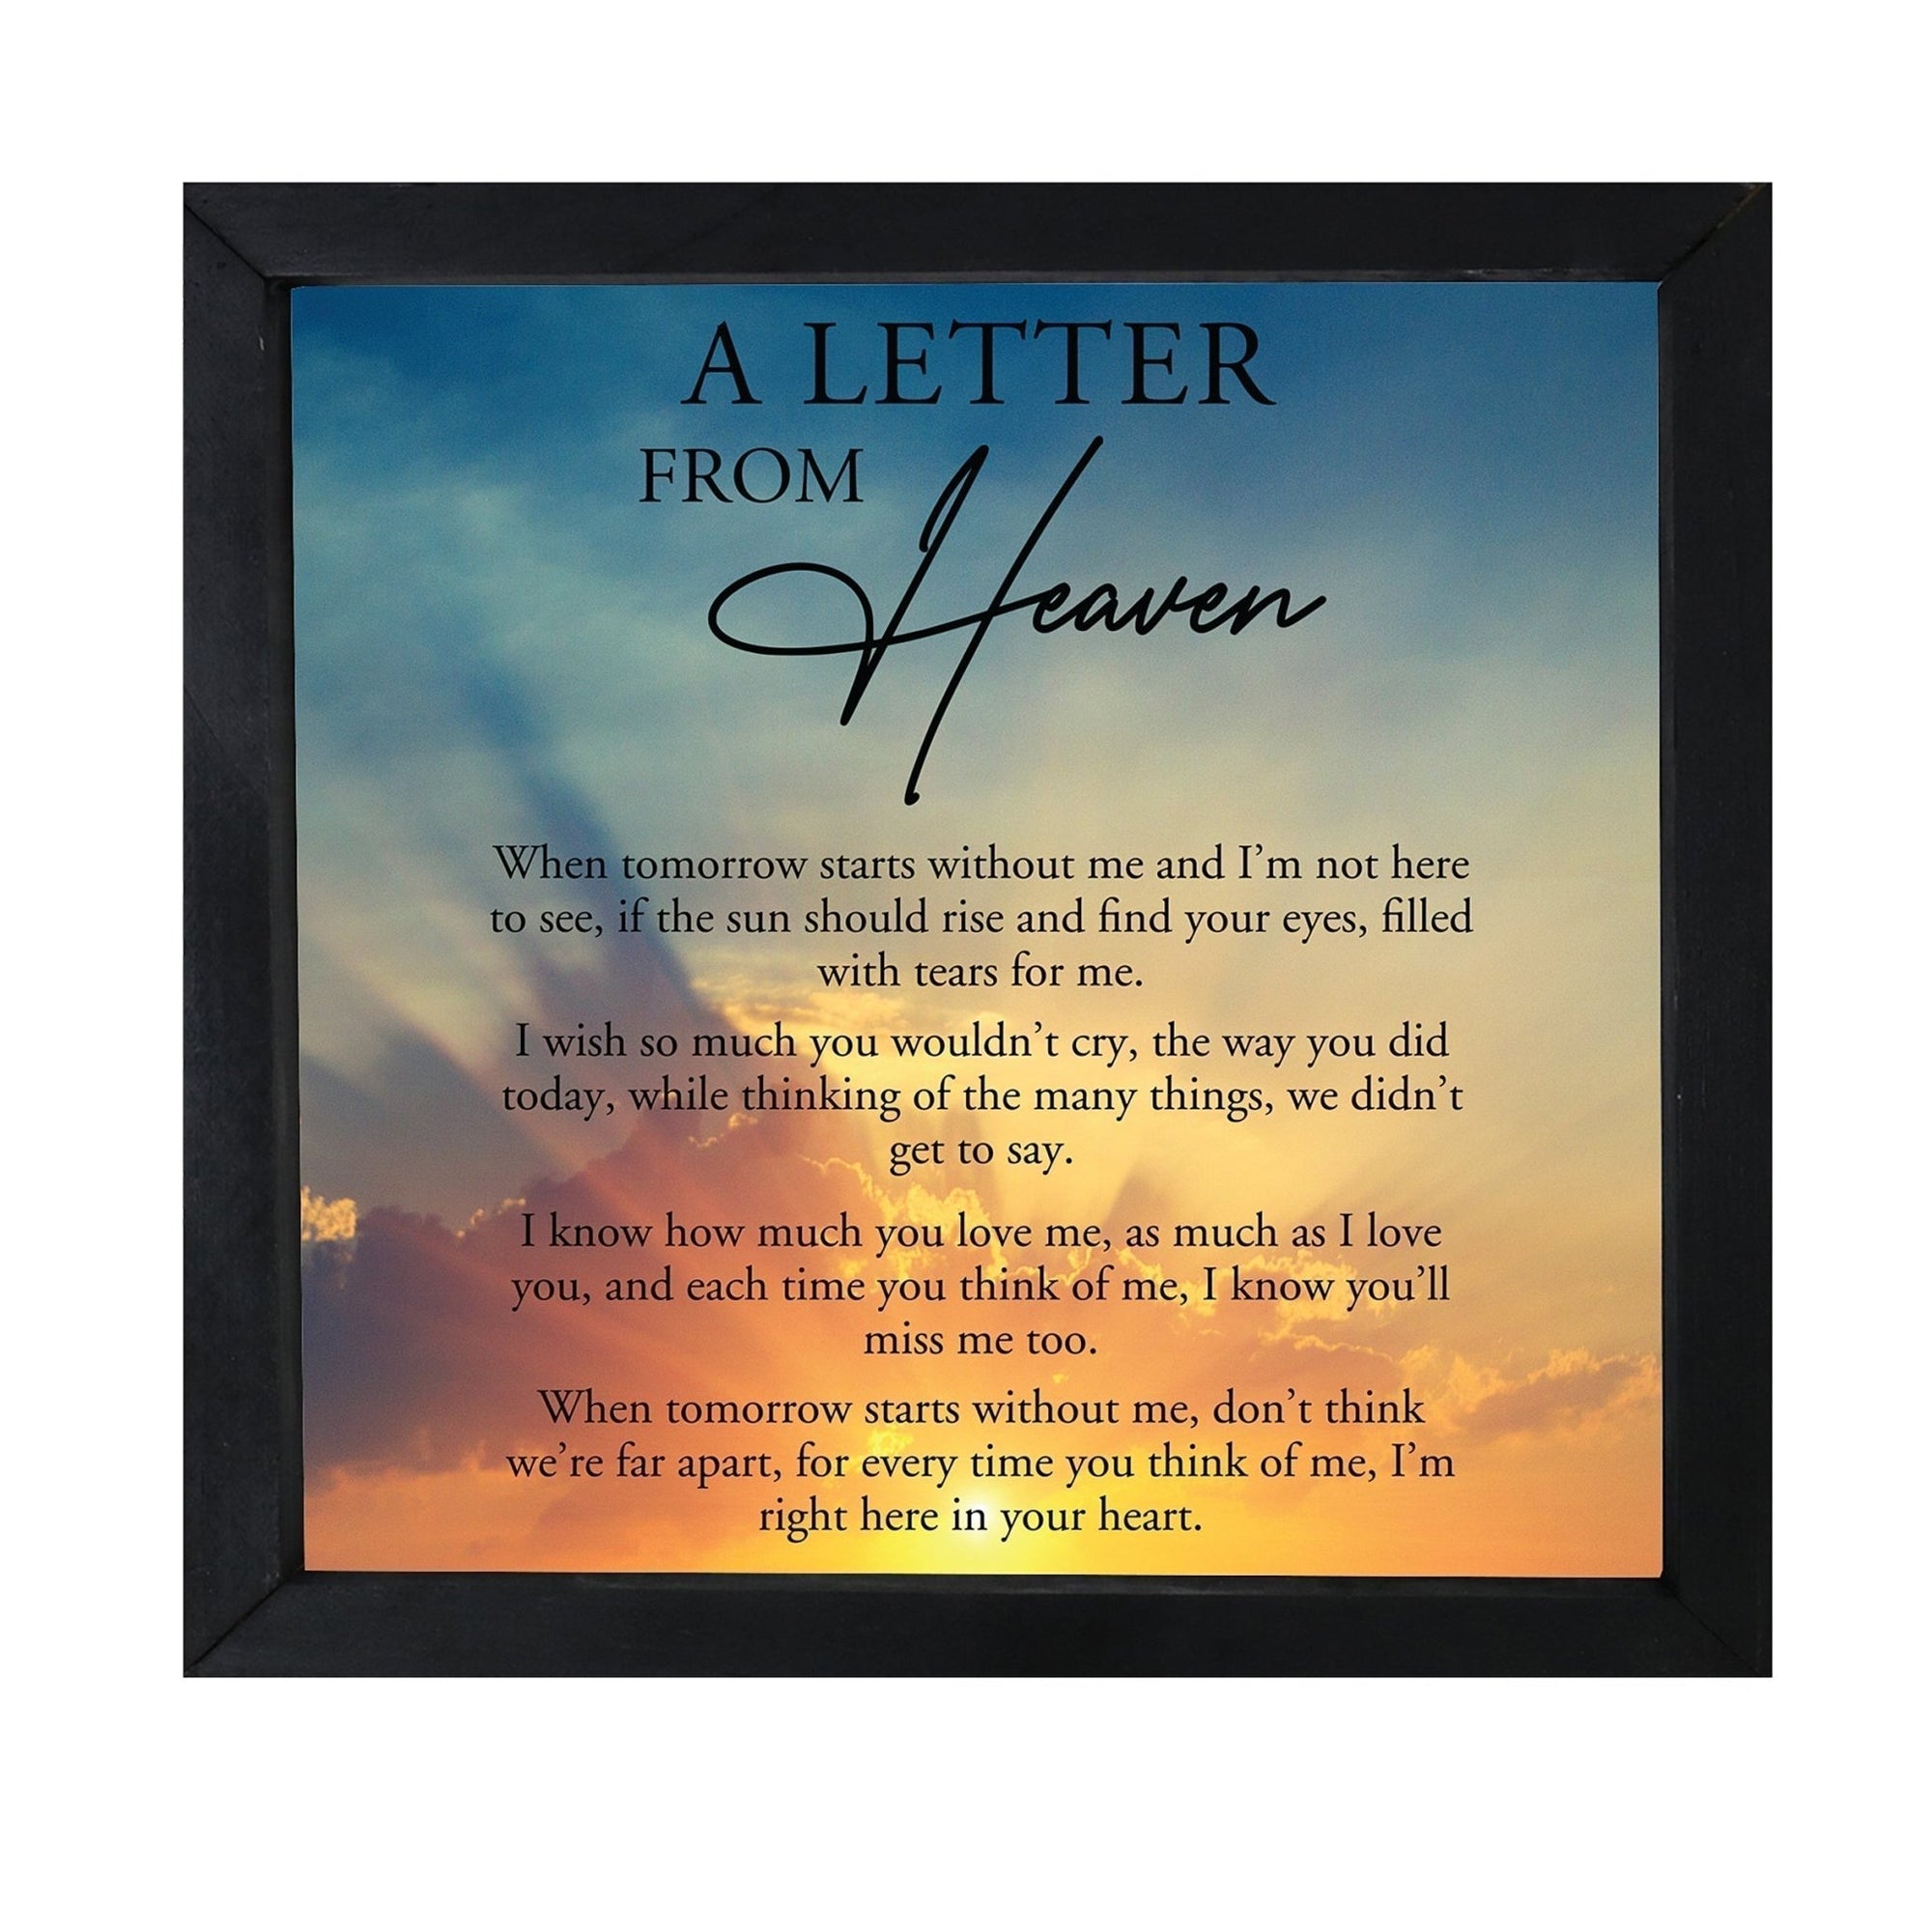 Memorial decorations for the celebration of life - a stunning framed shadow box to commemorate your loved one's legacy.